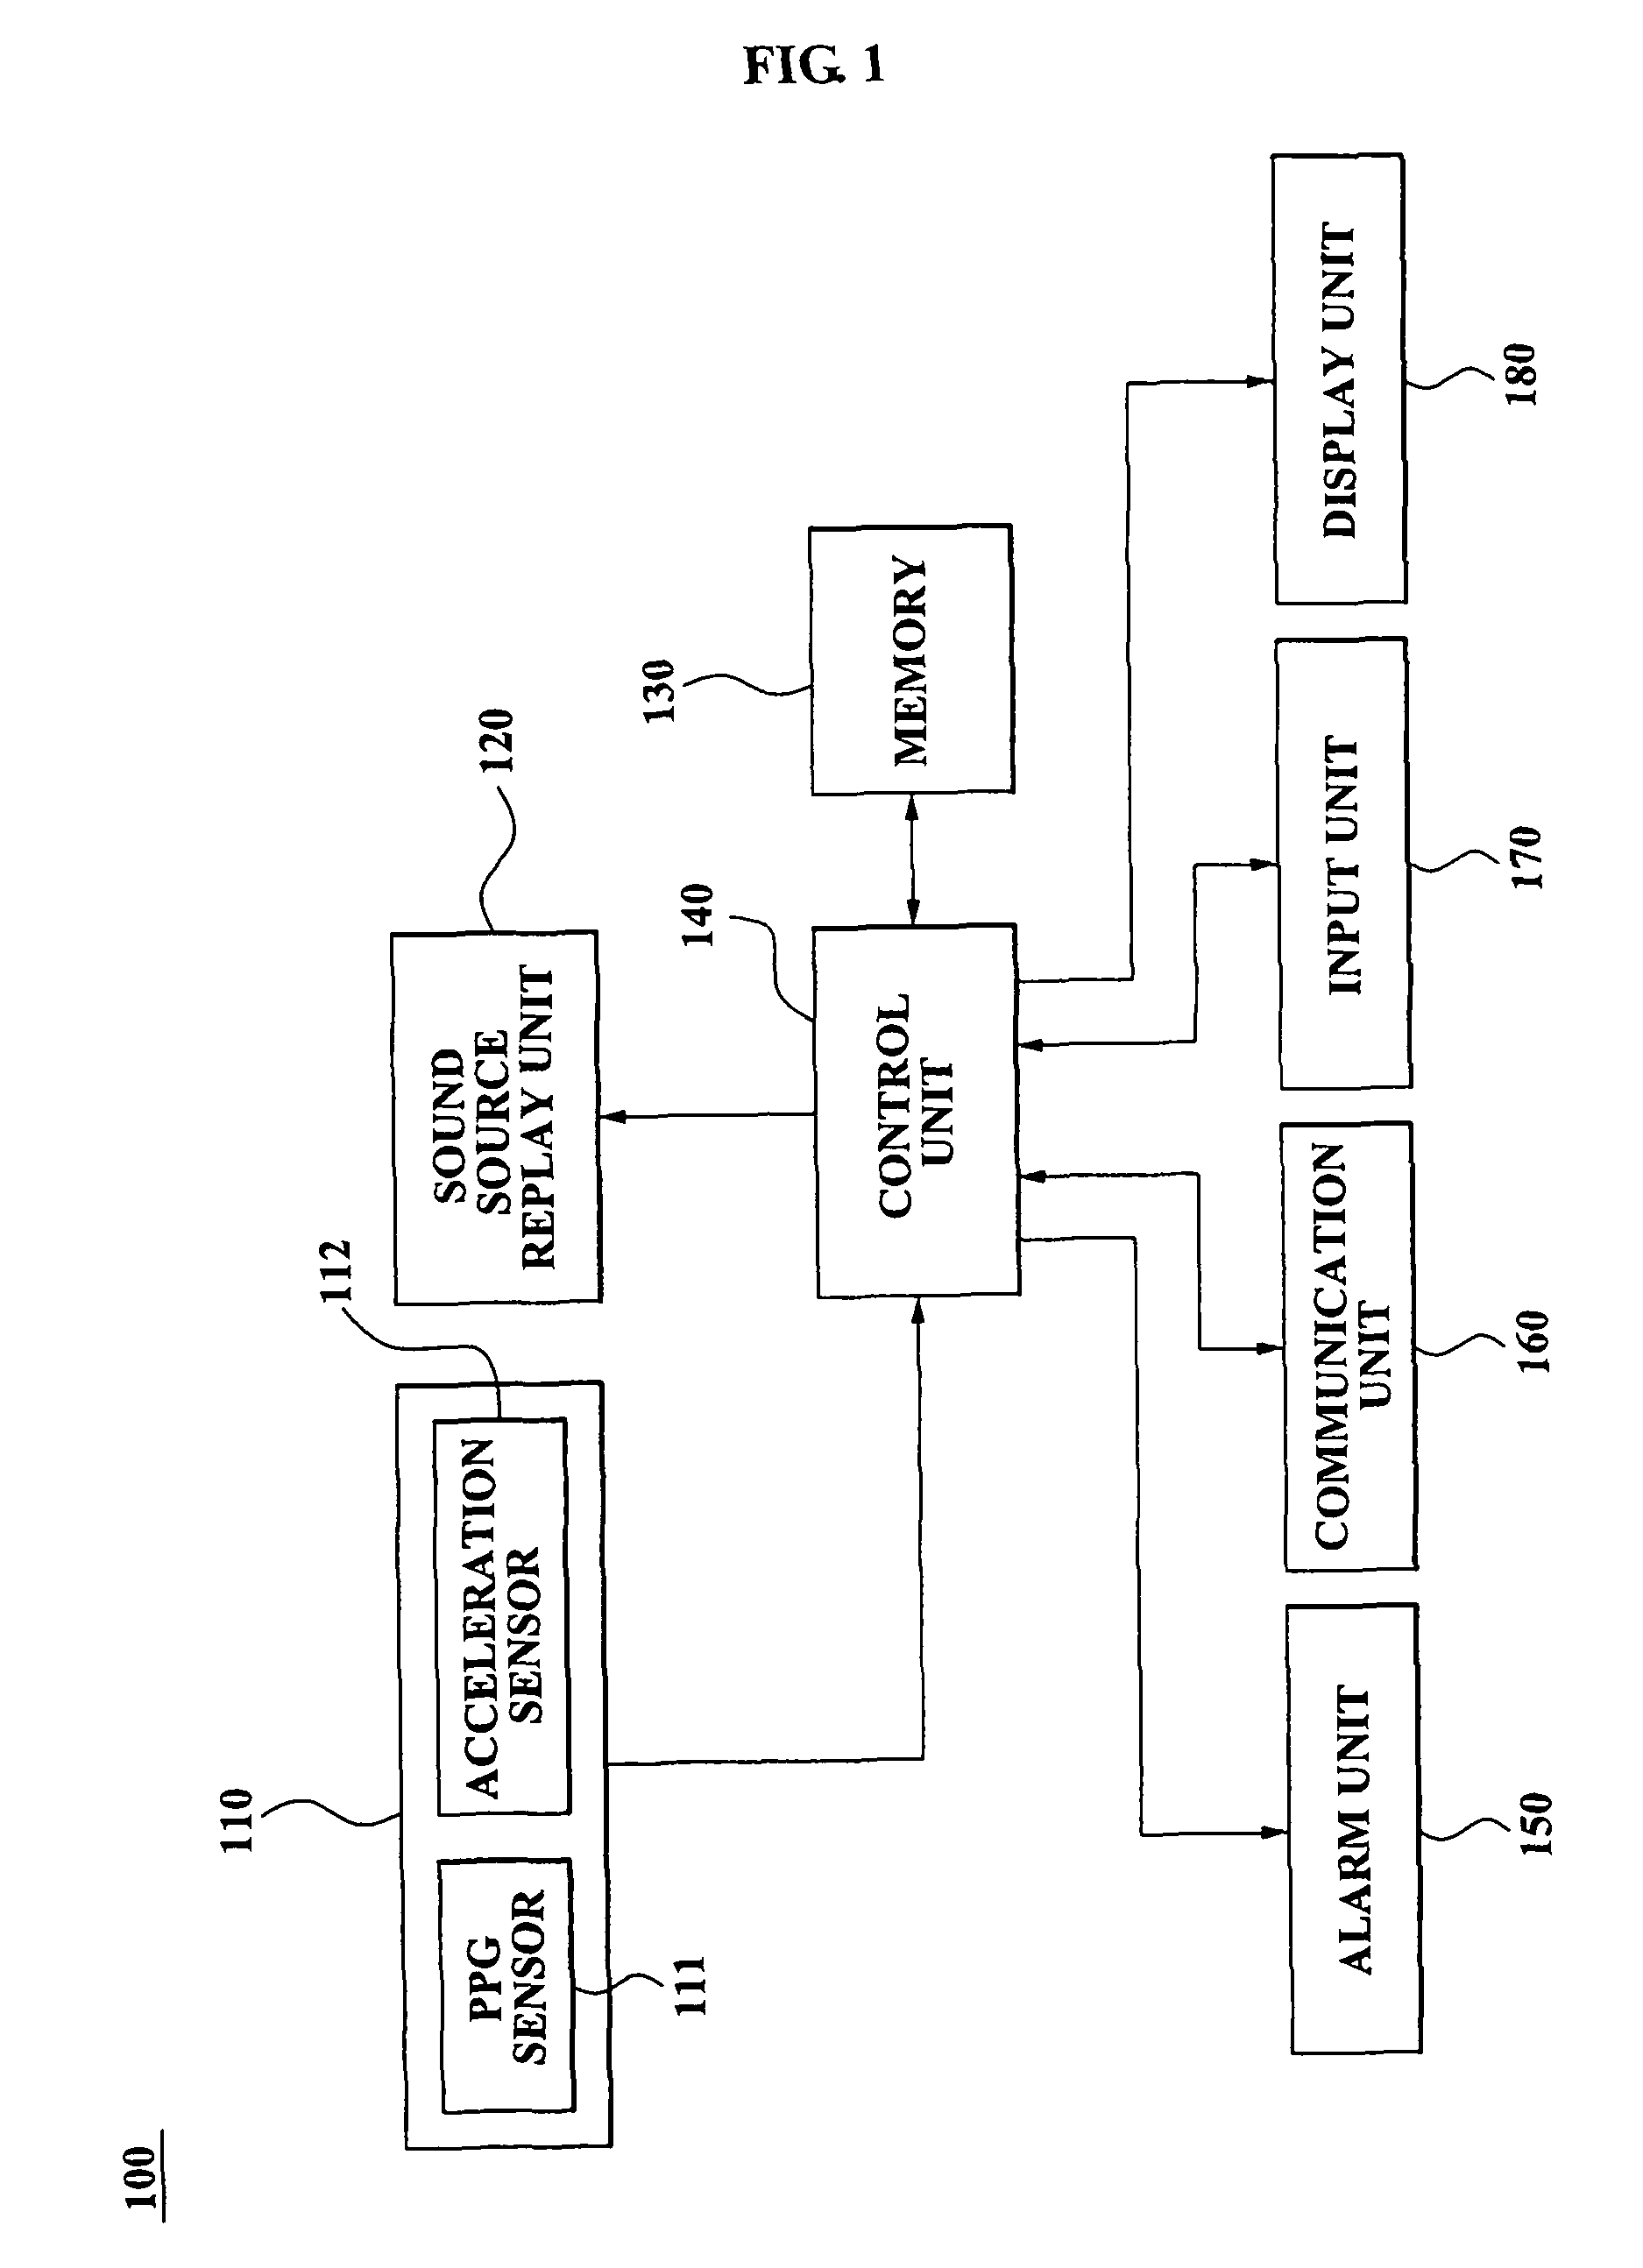 Method and apparatus for managing exercise state of user